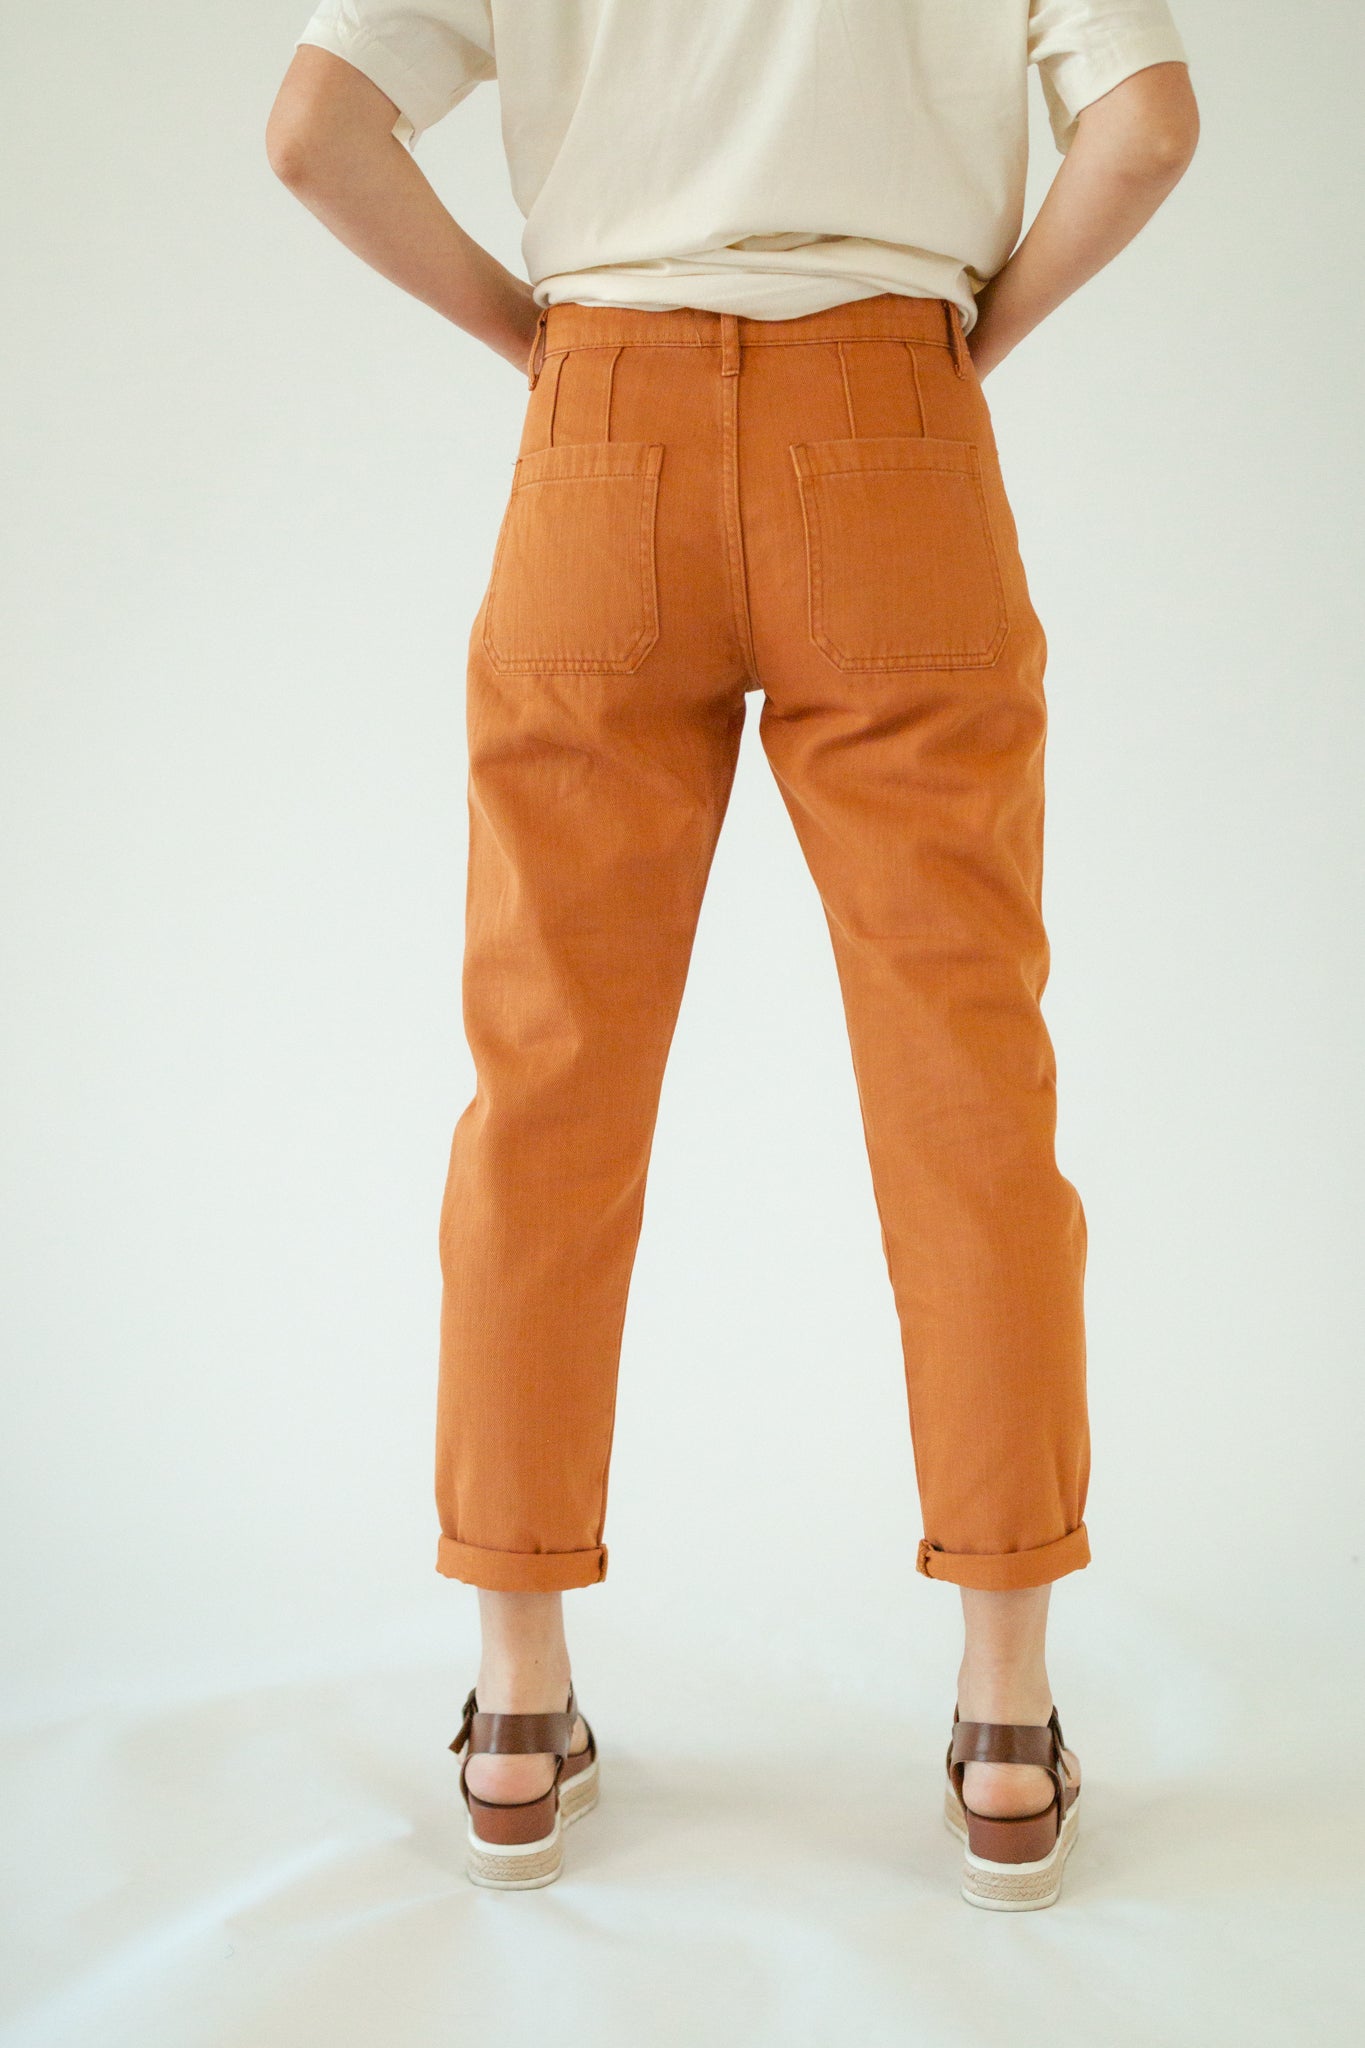 The Twill Pants・Camel